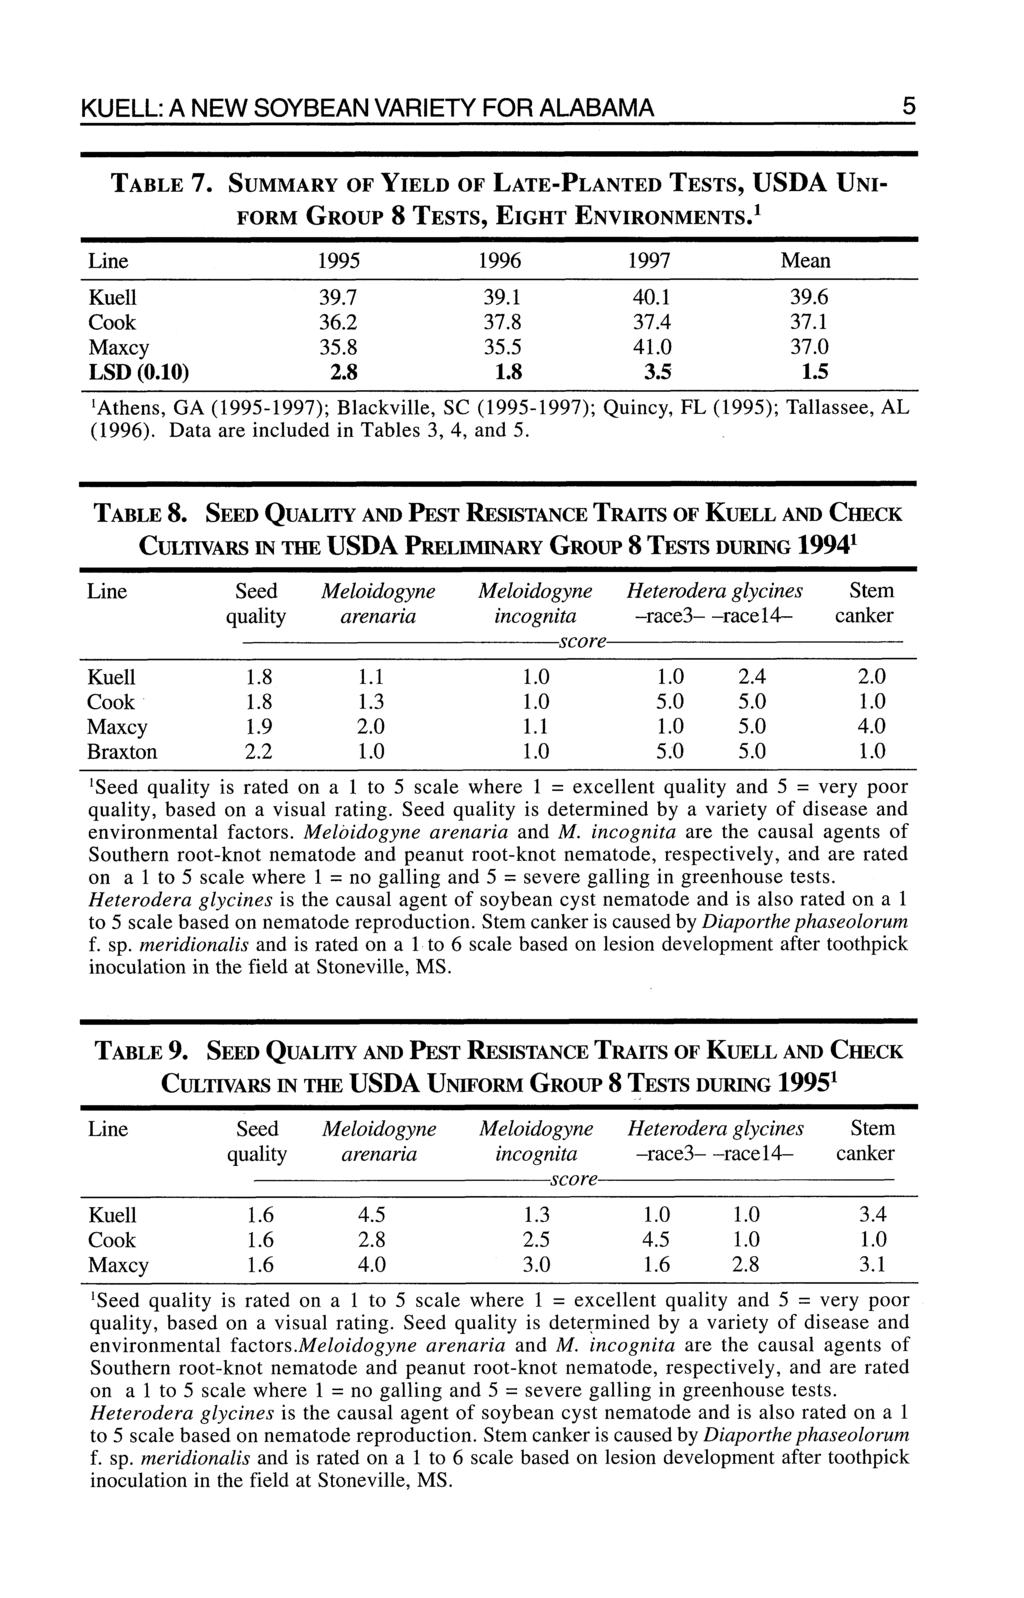 KUELL: A NEW SOYBEAN VARIETY FOR ALABAMA 5 TABLE 7. SUMMARY OF YIELD OF LATE-PLANTED TESTS, USDA UNI- FORM GROUP 8 TESTS, EIGHT ENVIRONMENTS.' Line 1995 1996 1997 Mean Kuell 39.7 39.1 40.1 39.